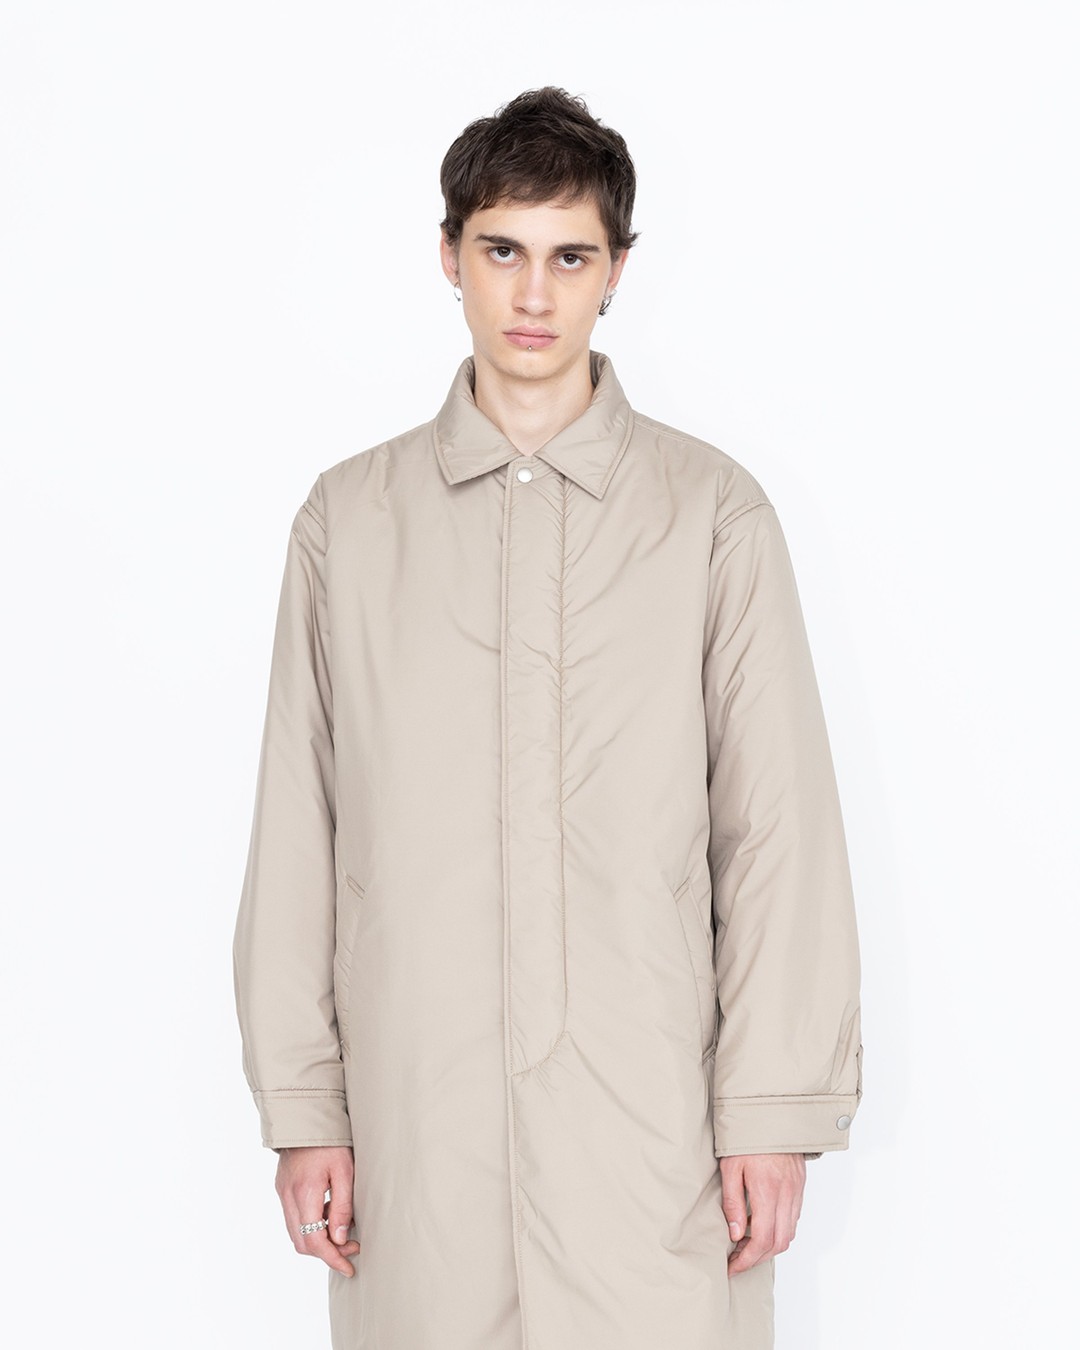 Highsnobiety HS05 – Light Insulated Eco-Poly Trench Coat Beige - Outerwear - Beige - Image 3